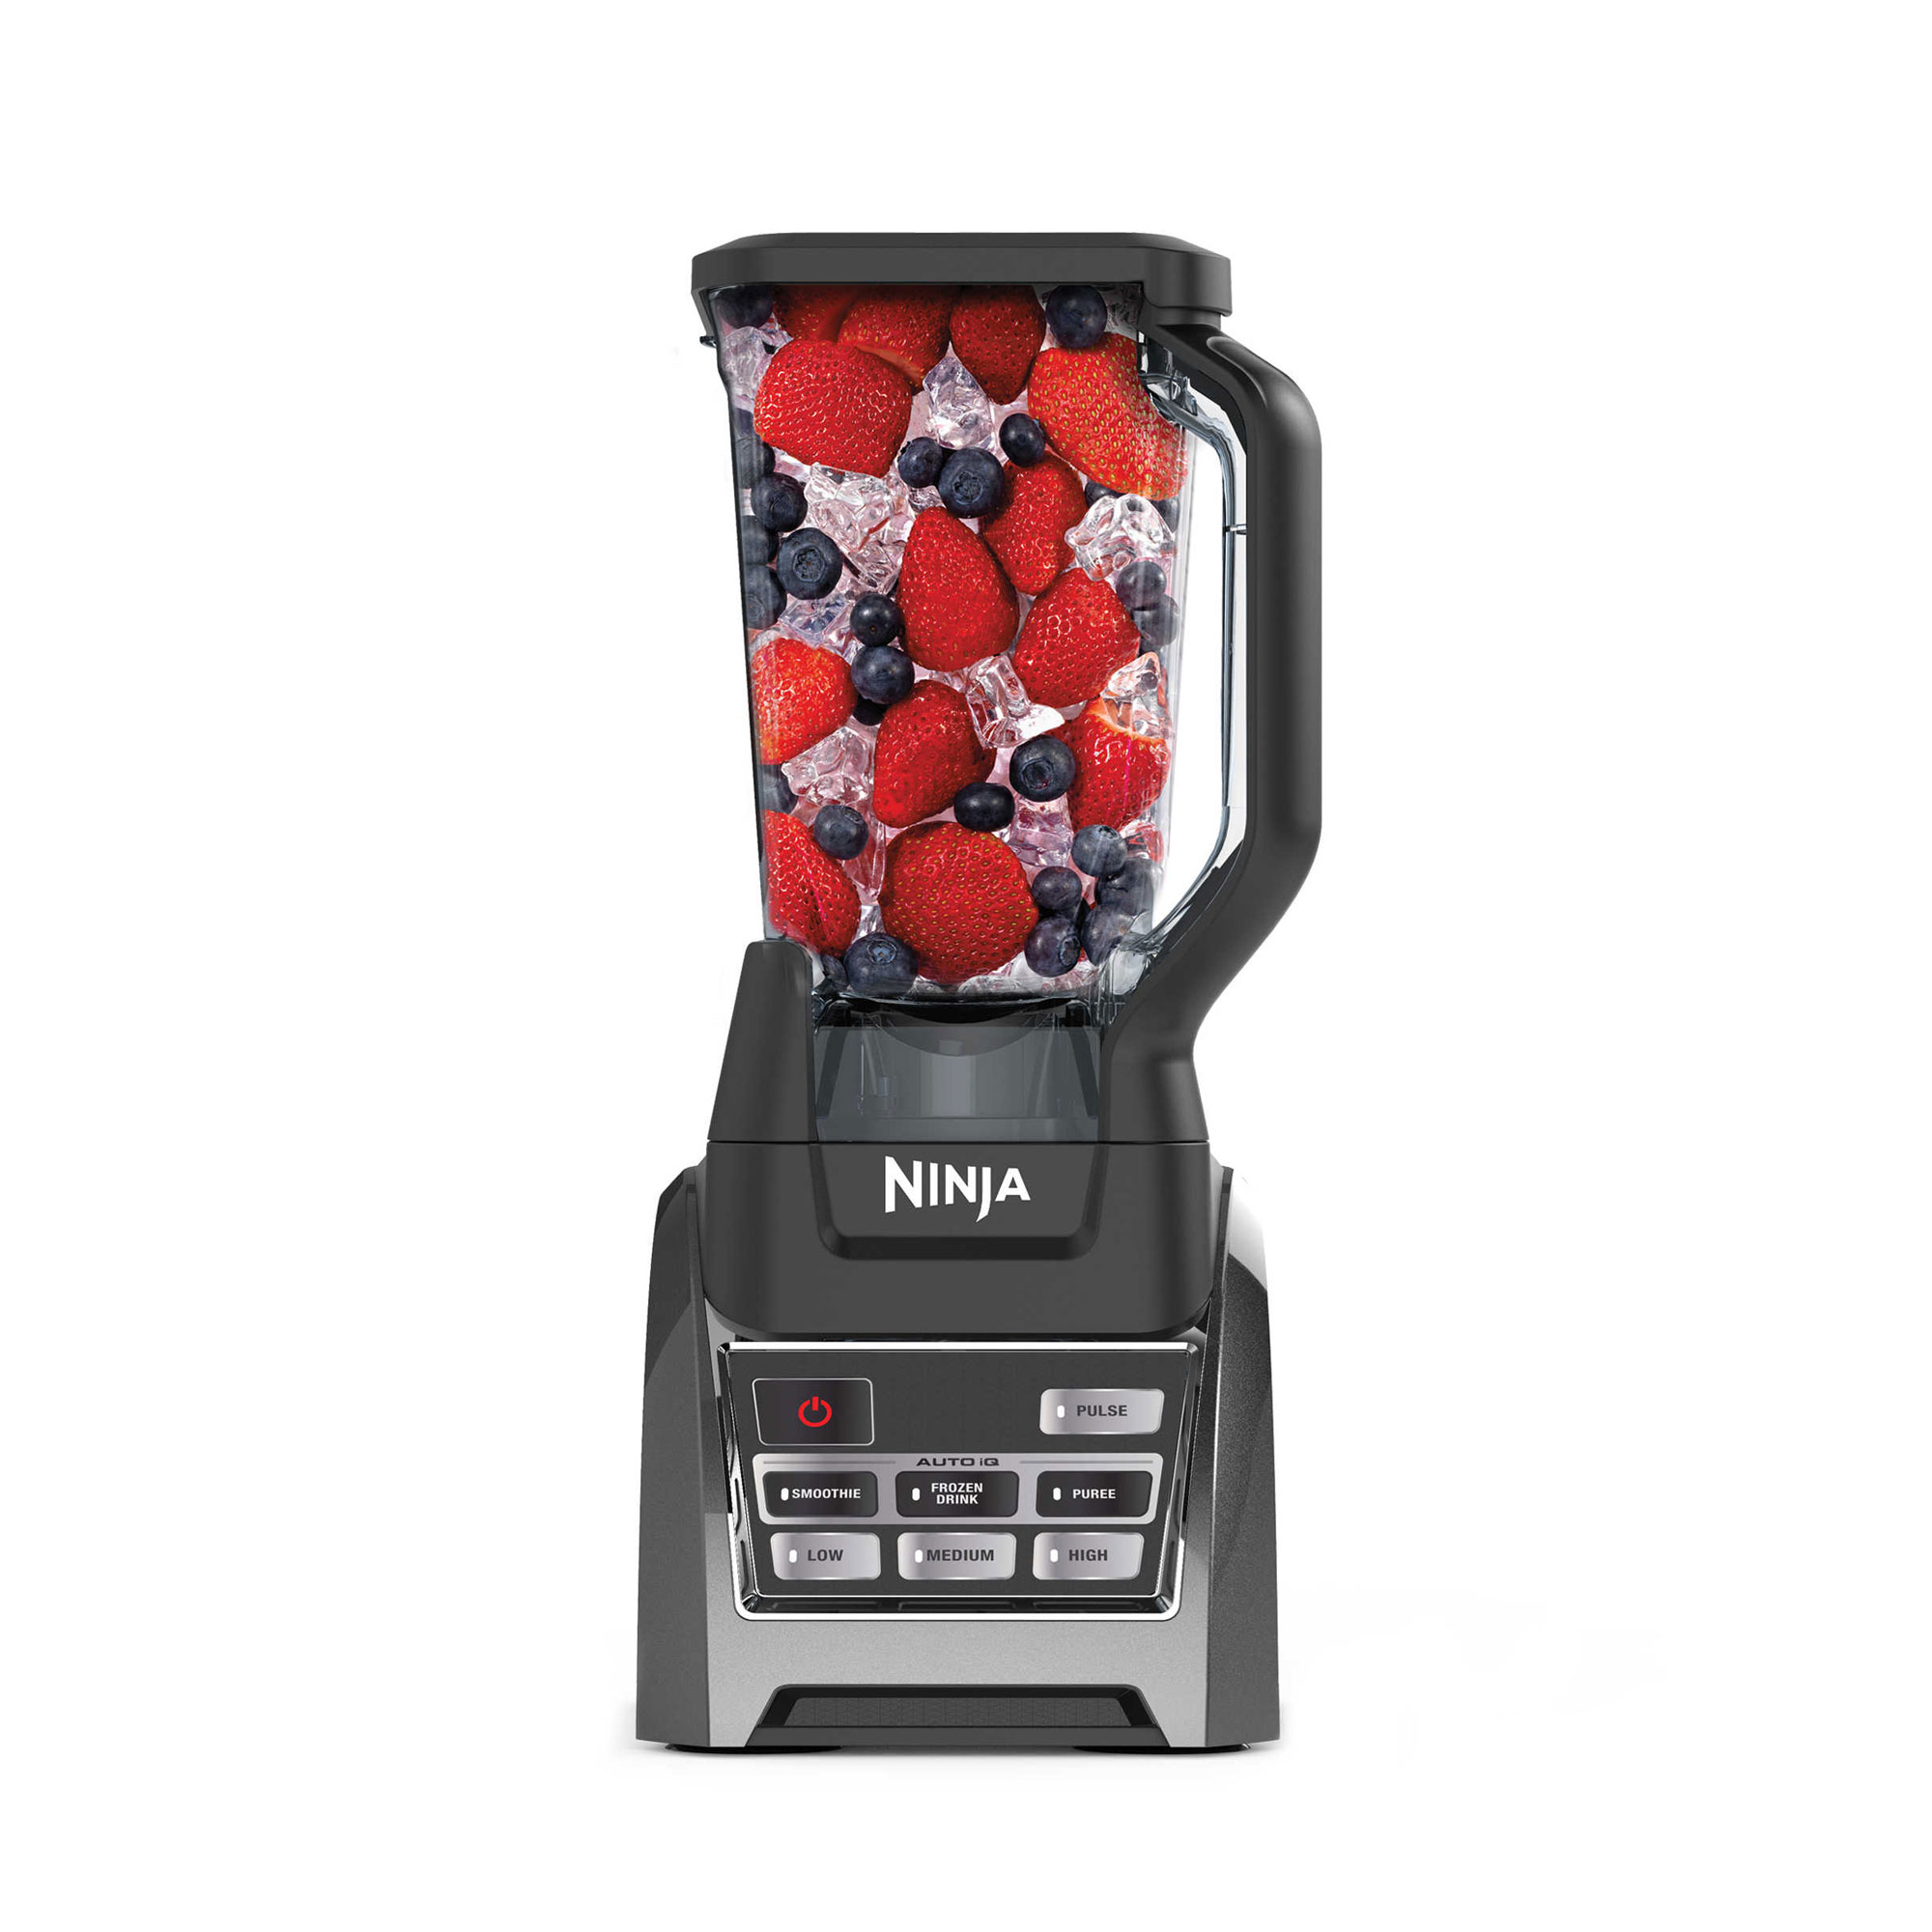 Ninja BL688 Professional Auto iQ Countertop Blender with Total Crushing Technology, Black, 72 Oz - image 1 of 3